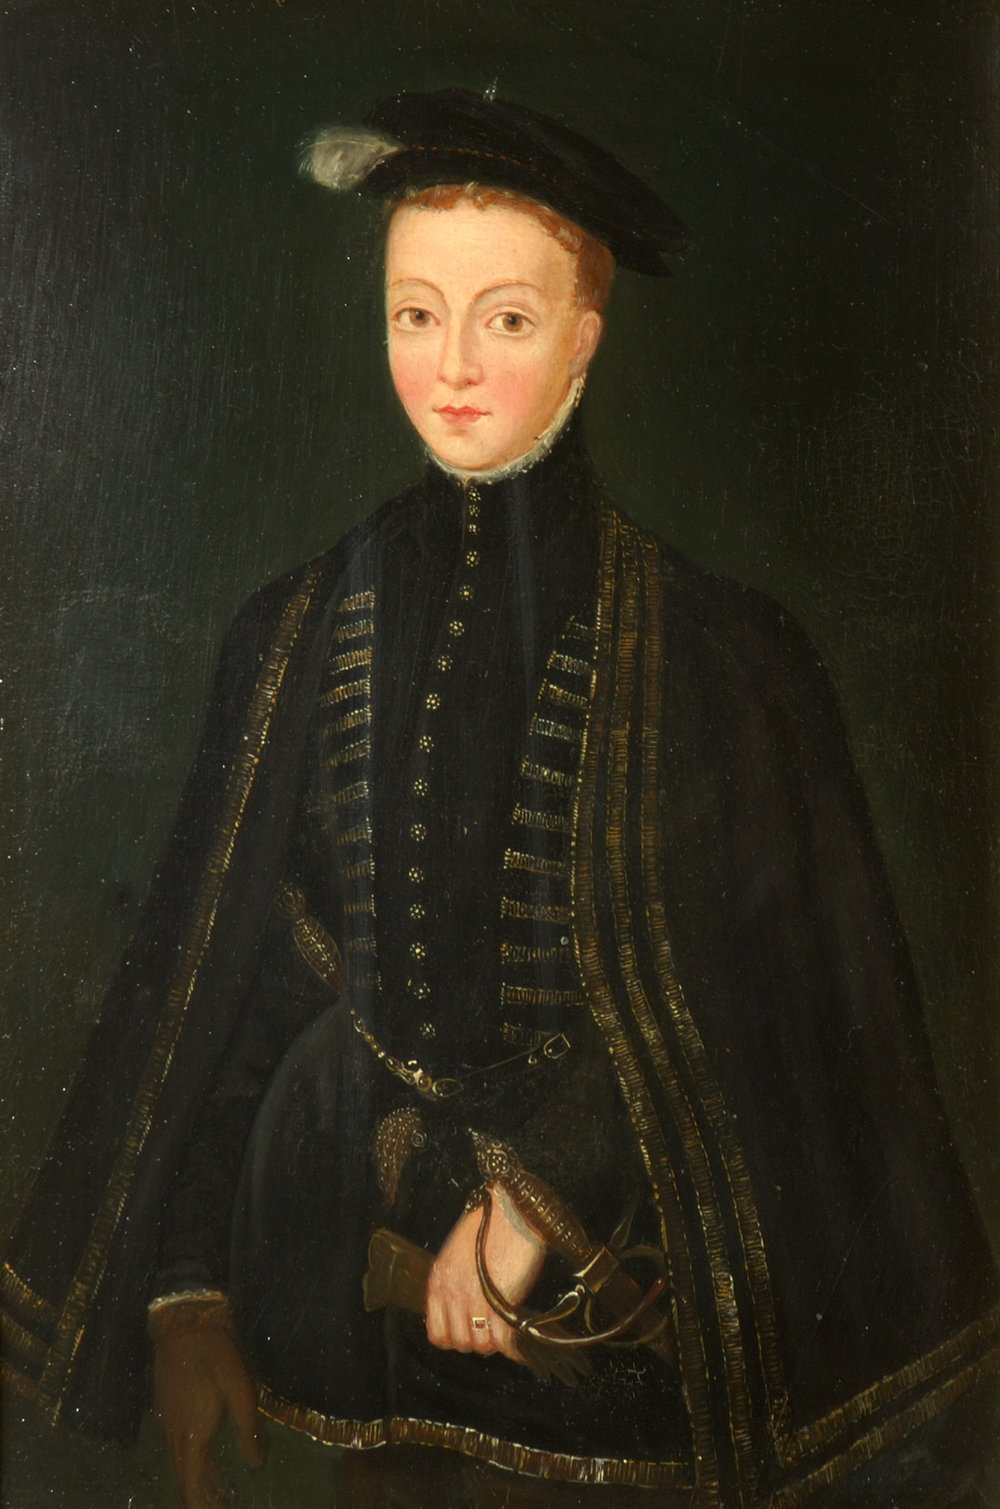 A portrait of Lord Darnley